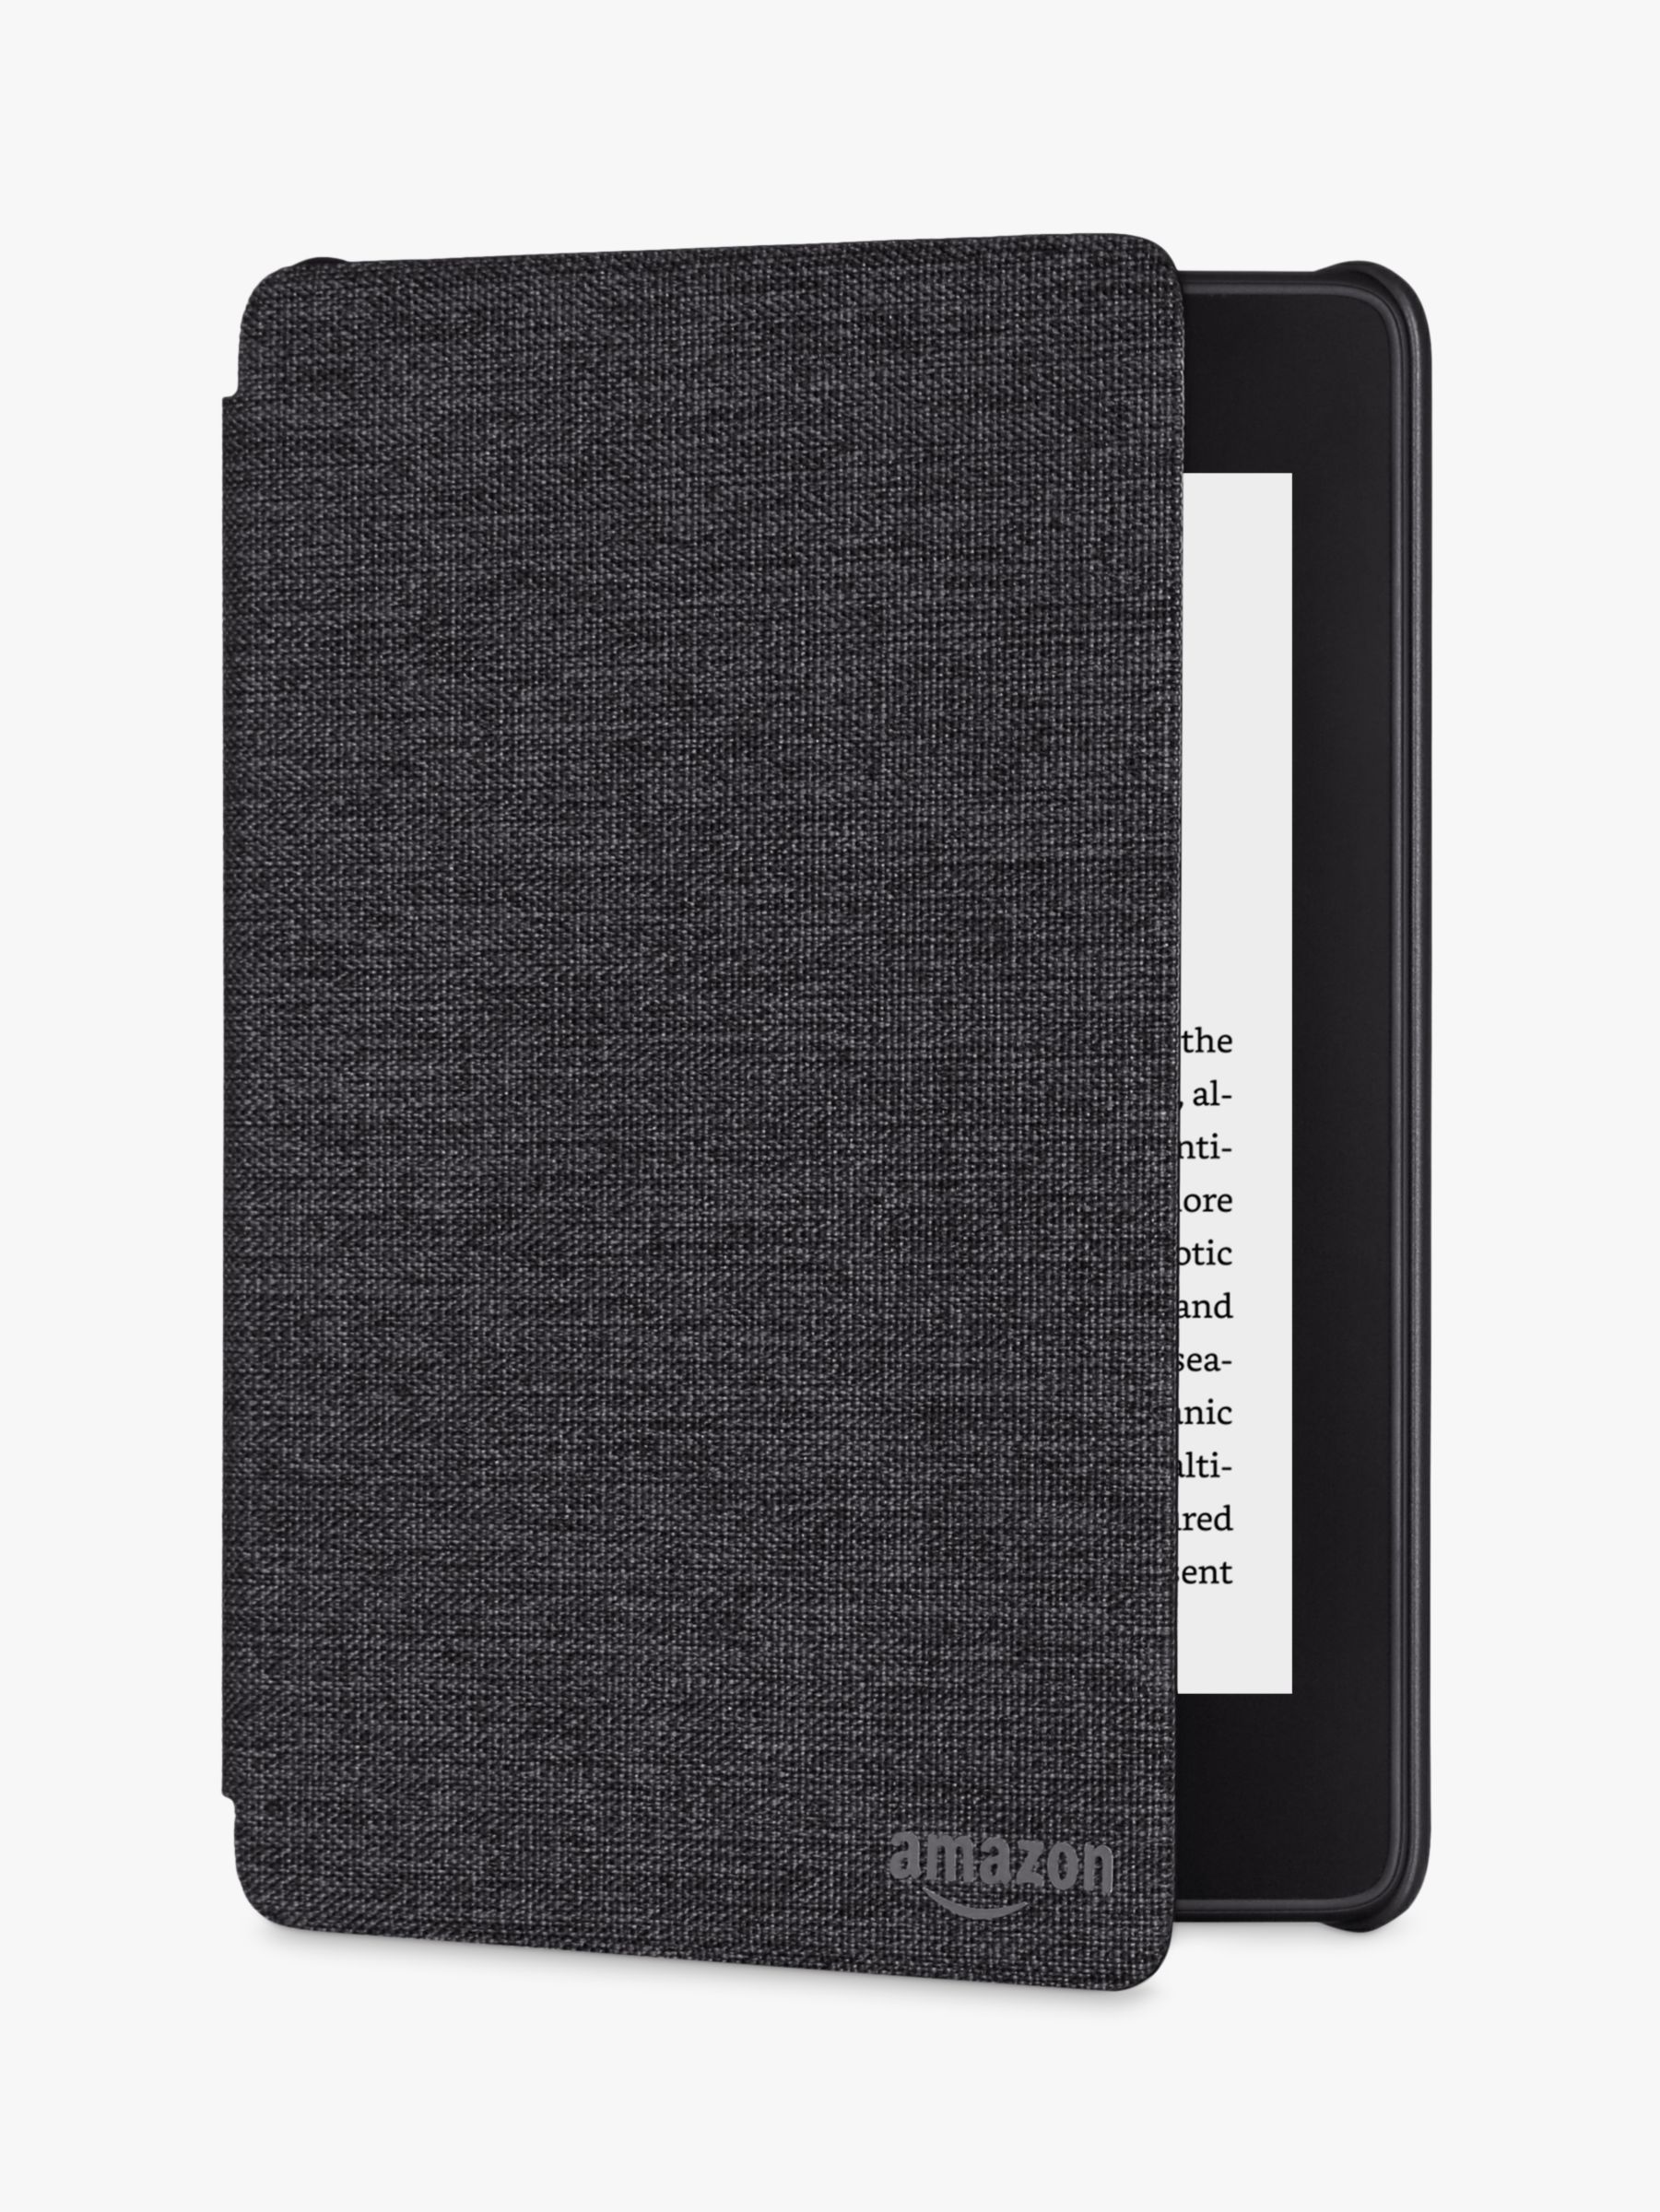 Amazon Cover for Kindle Paperwhite 10th  Generation at 